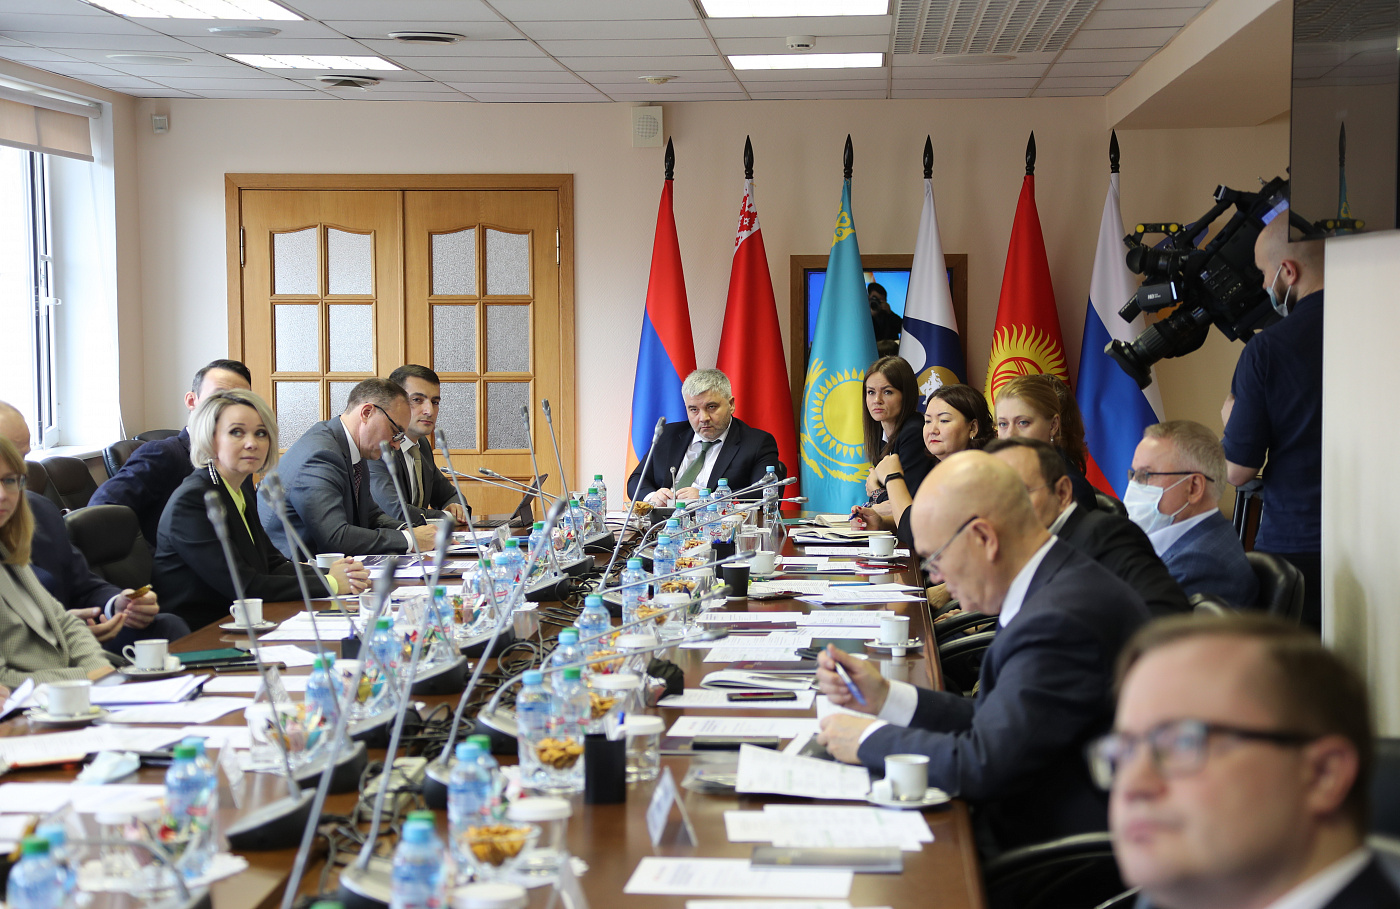 Development of the food market was discussed at the EEC